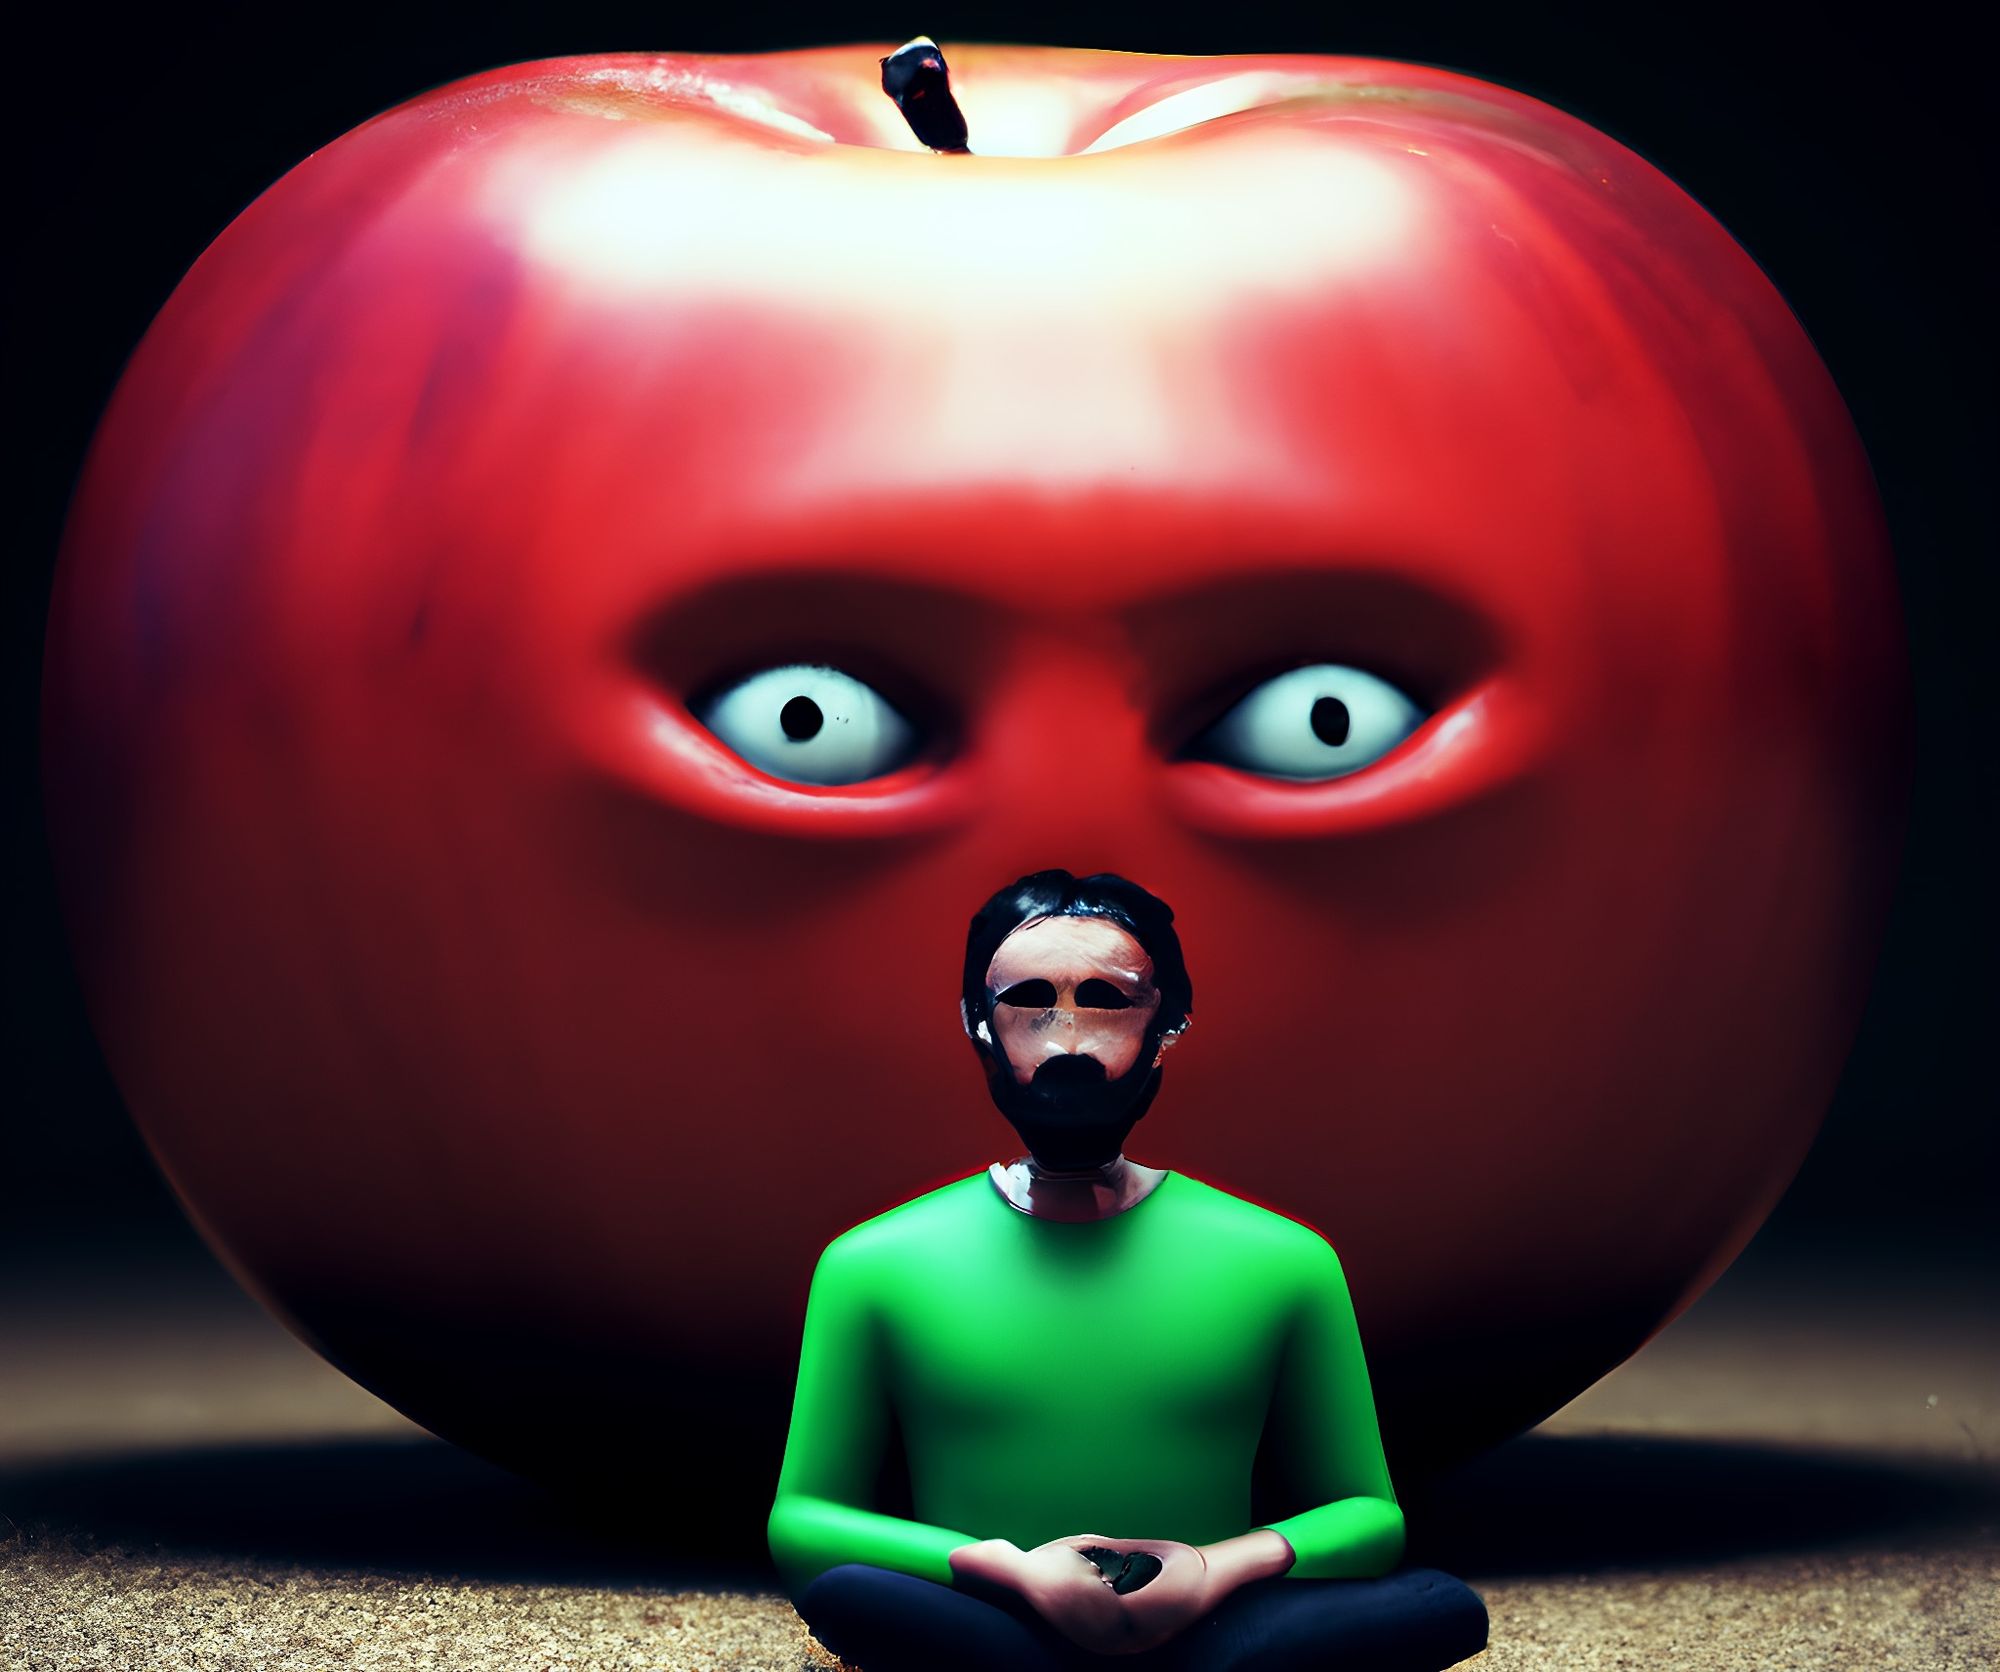 An apple creepily looking at a person